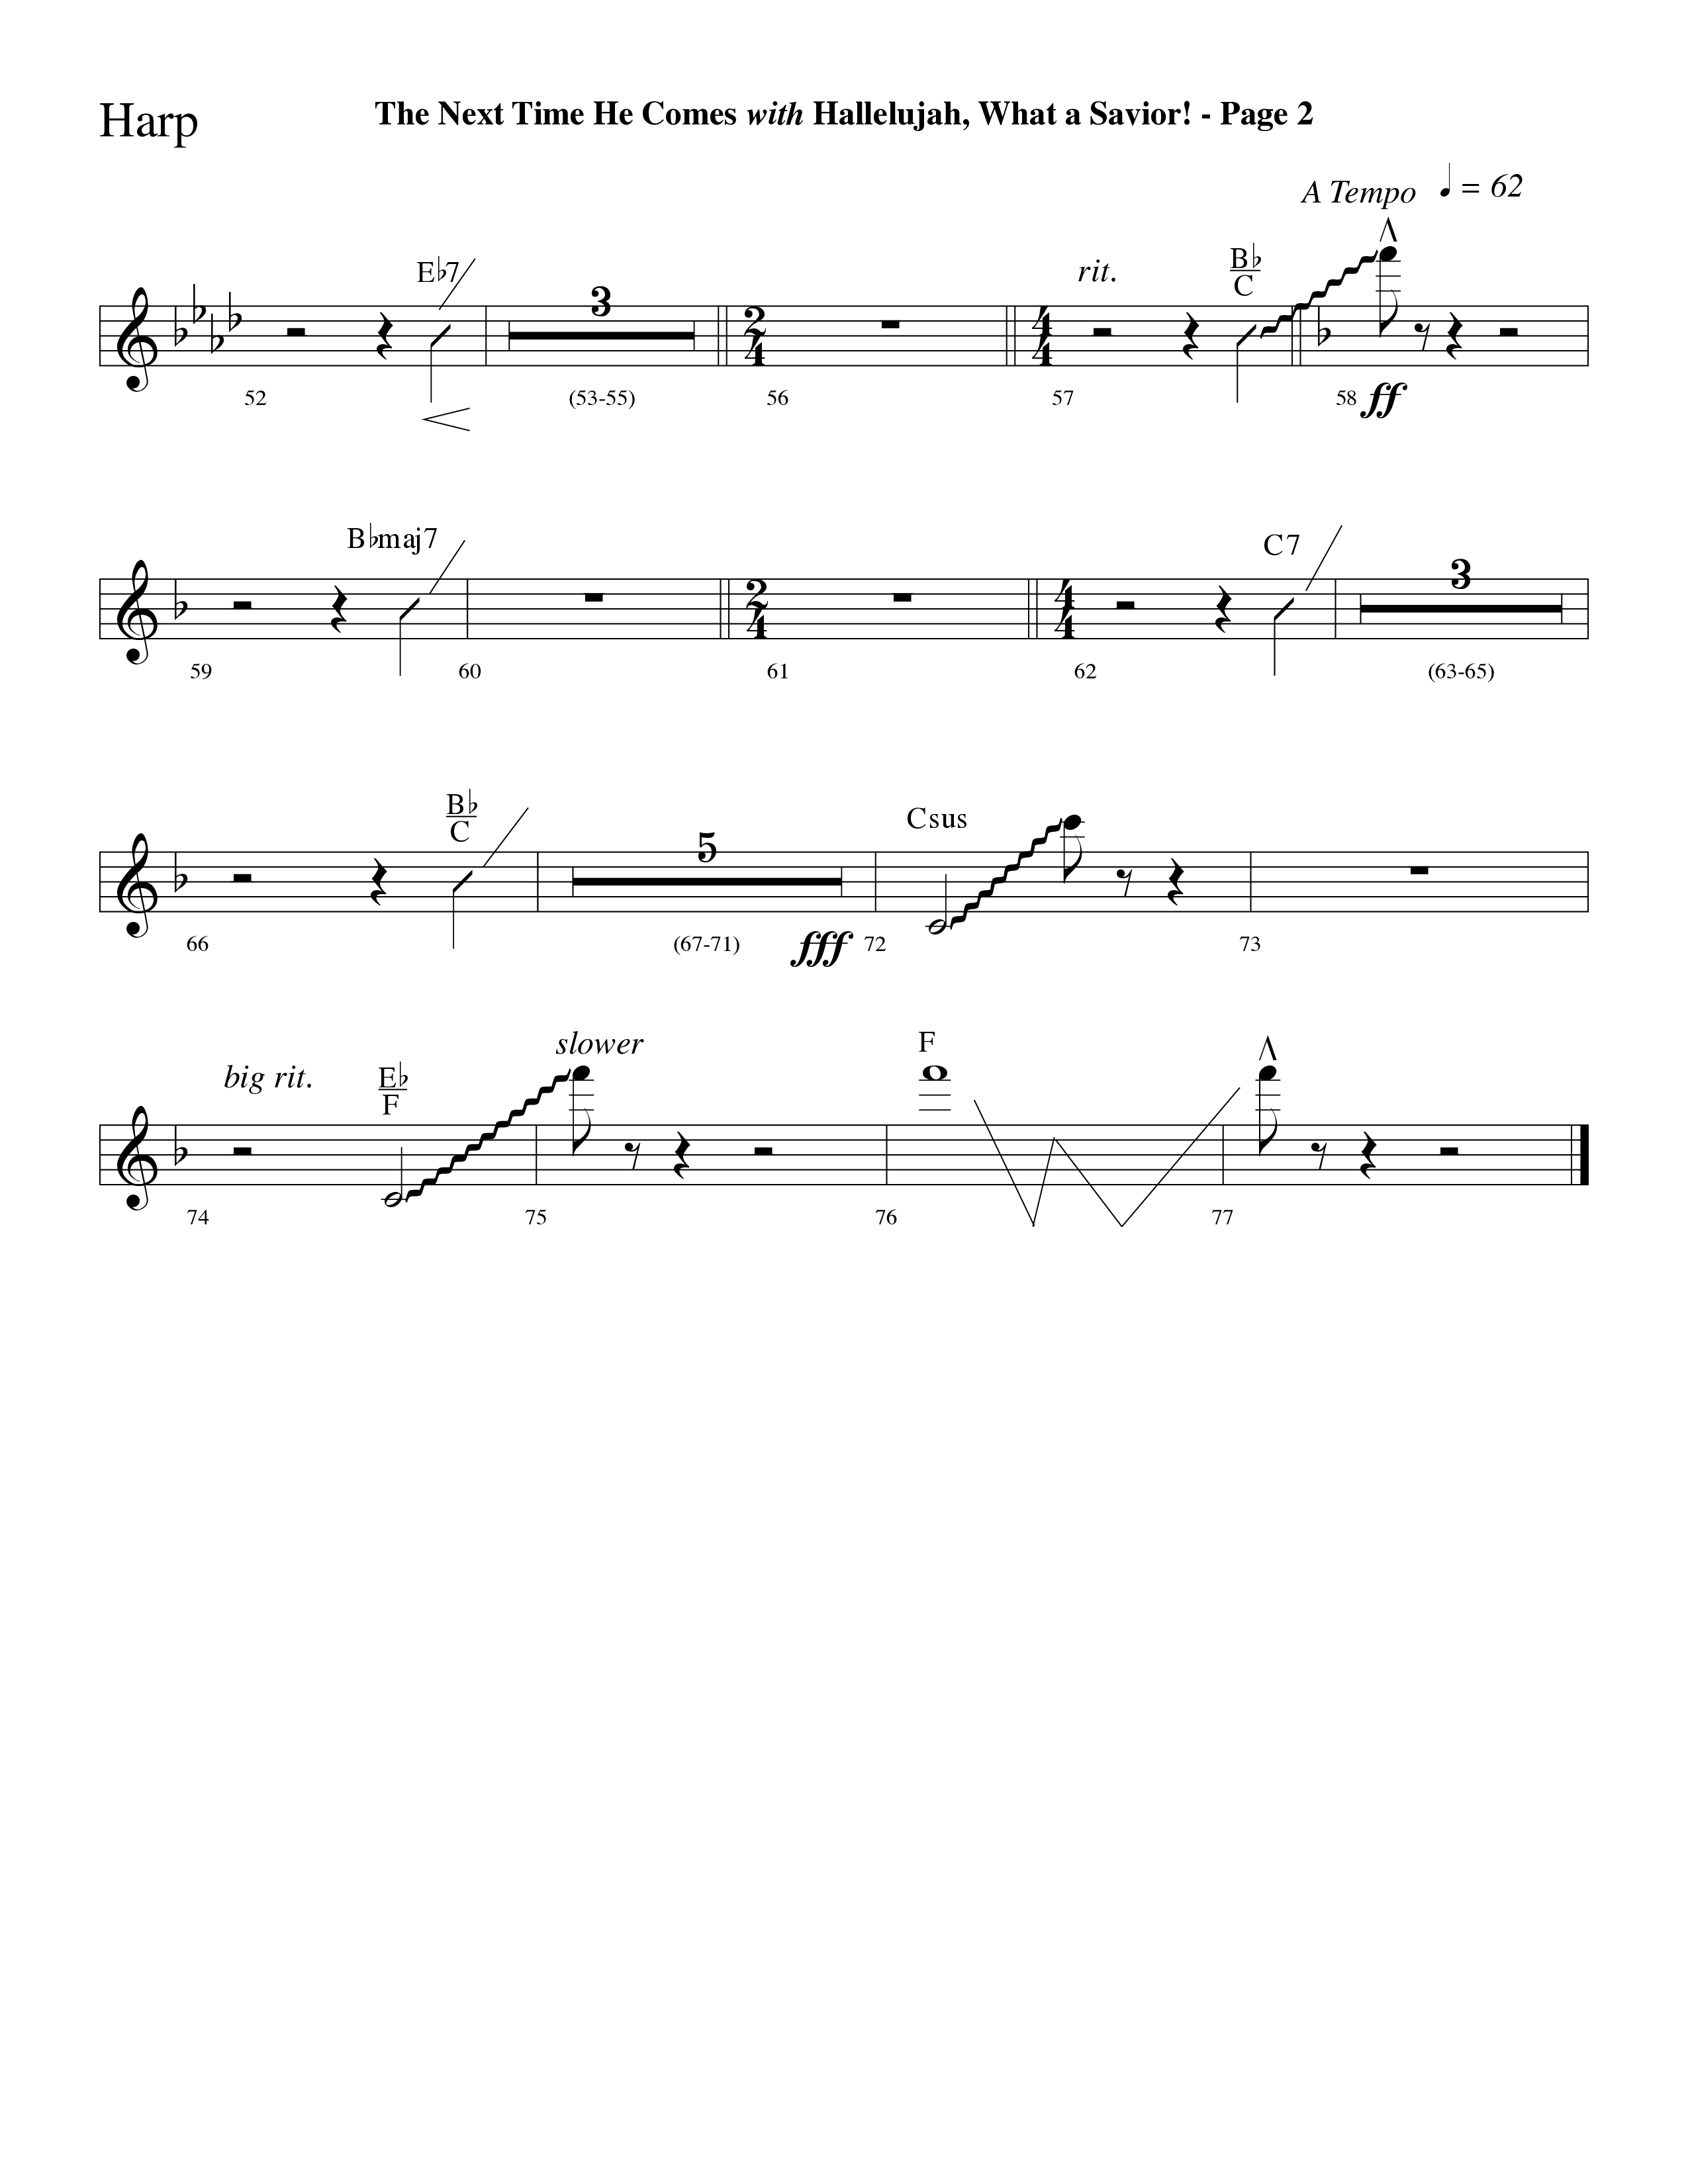 The Next Time He Comes (with Hallelujah What A Savior) (Choral Anthem SATB) Harp (Lifeway Choral / Arr. Dave Williamson)